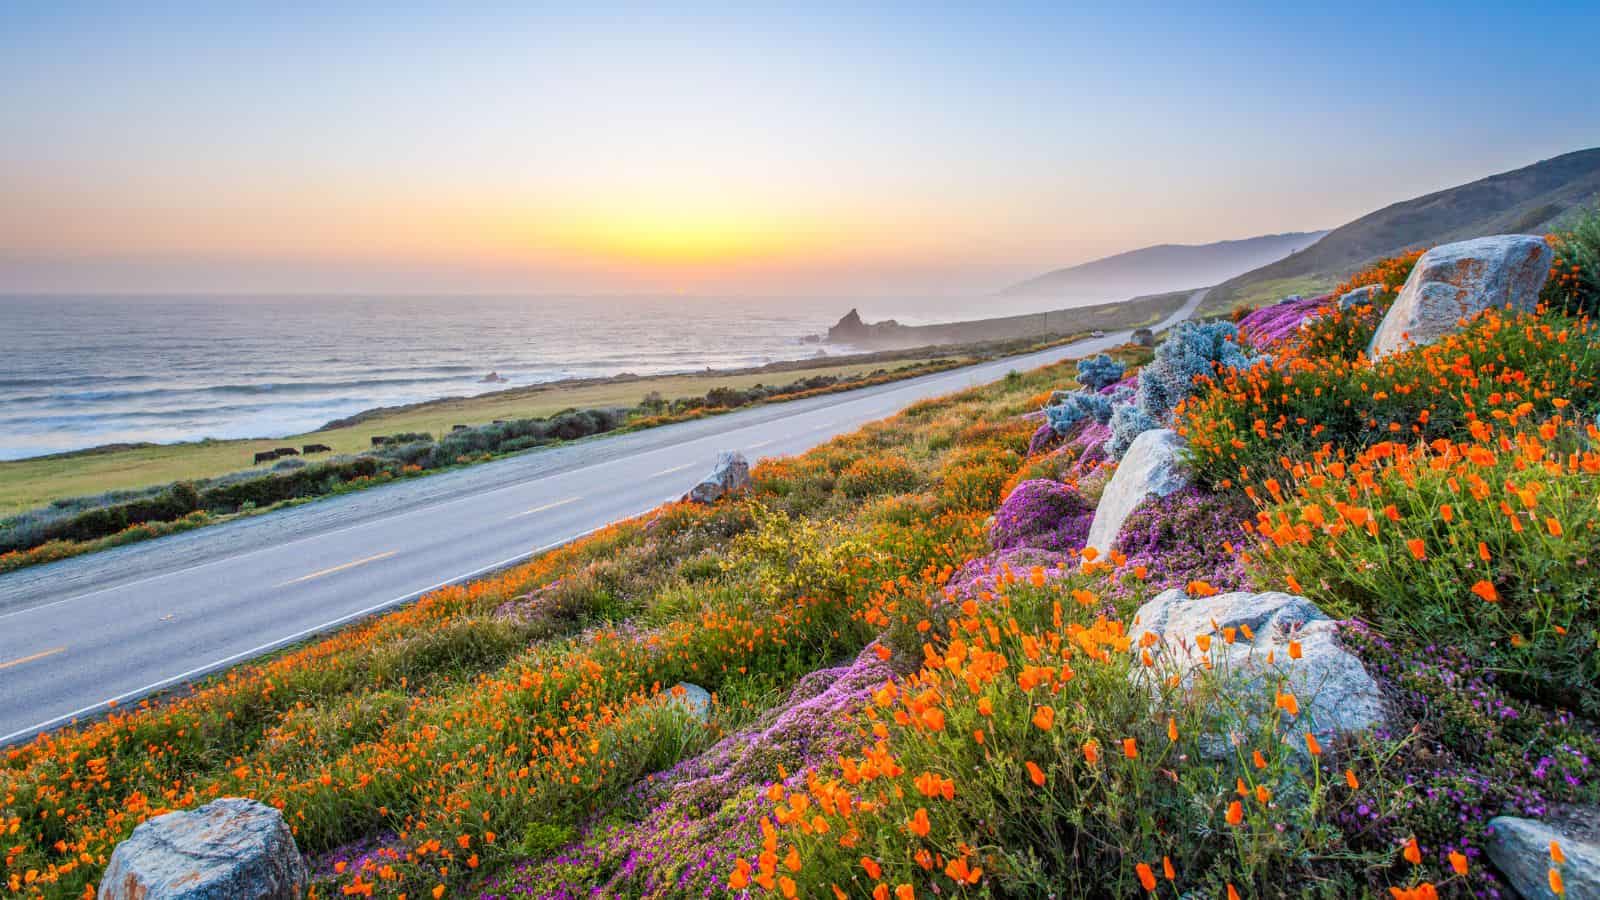 <p>Embark on a mesmerizing journey along California’s Pacific Coast Highway, stretching from Monterey to Morro Bay. This iconic route offers a stunning blend of rugged coastline, romantic beaches, and iconic landmarks like the Bixby Creek Bridge and Big Sur.</p><p>Stop at charming coastal towns, indulge in fresh seafood, and enjoy the sunset over the Pacific Ocean. Don’t miss the opportunity to explore the coastal redwoods in Julia Pfeiffer Burns State Park and the artist community of Carmel-by-the-Sea.</p>